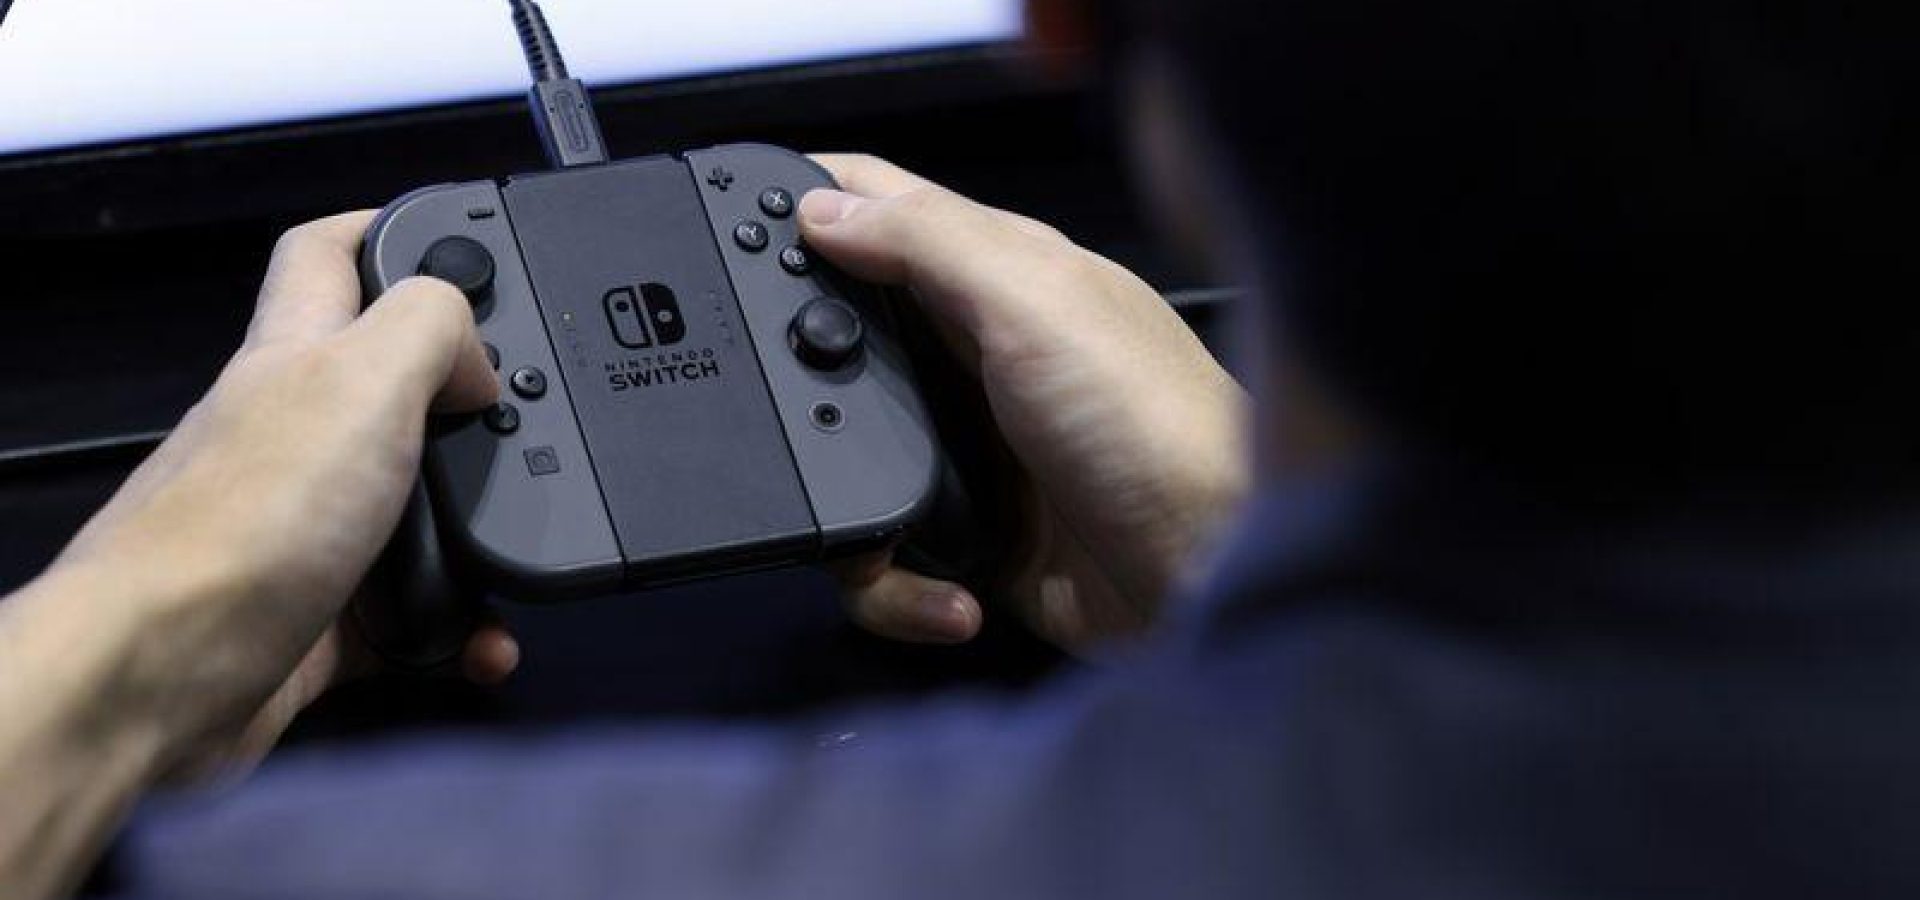 Saudi Arabia Now Holds the Largest Stake in Nintendo